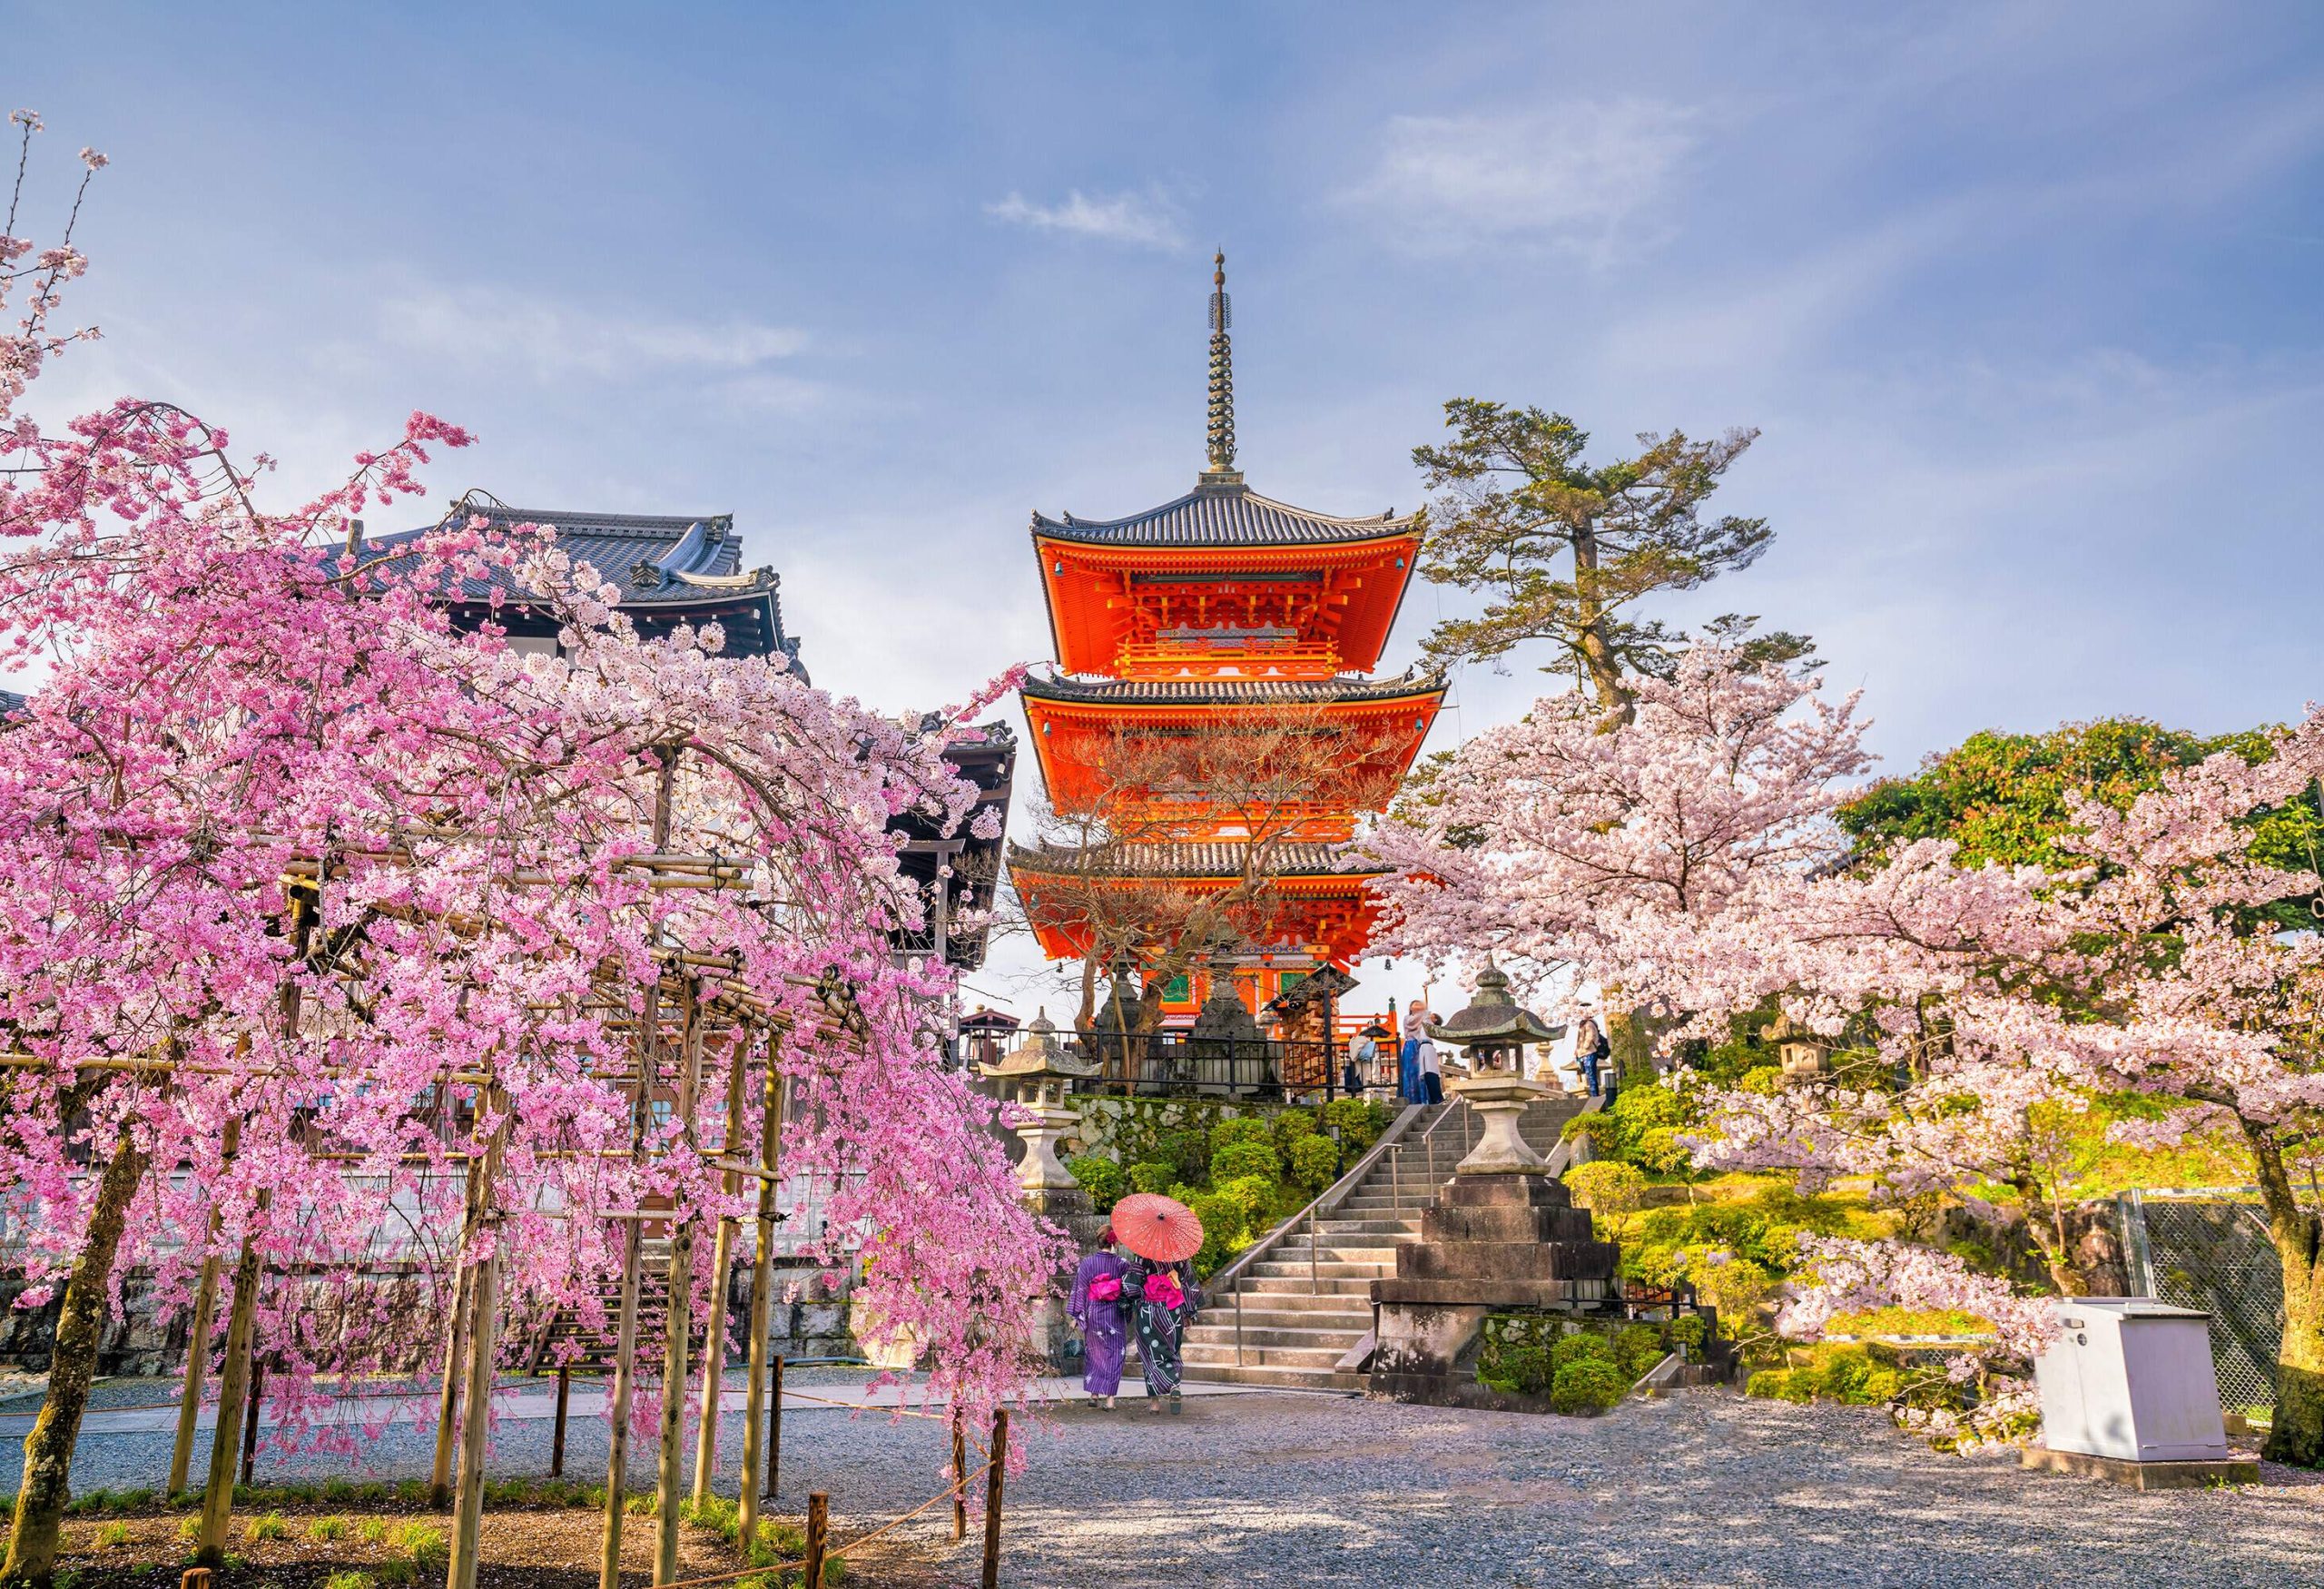 A three-tier Japanese pagoda-like temple with a bright orange facade perched atop a hill surrounded by beautiful cherry blossoms.